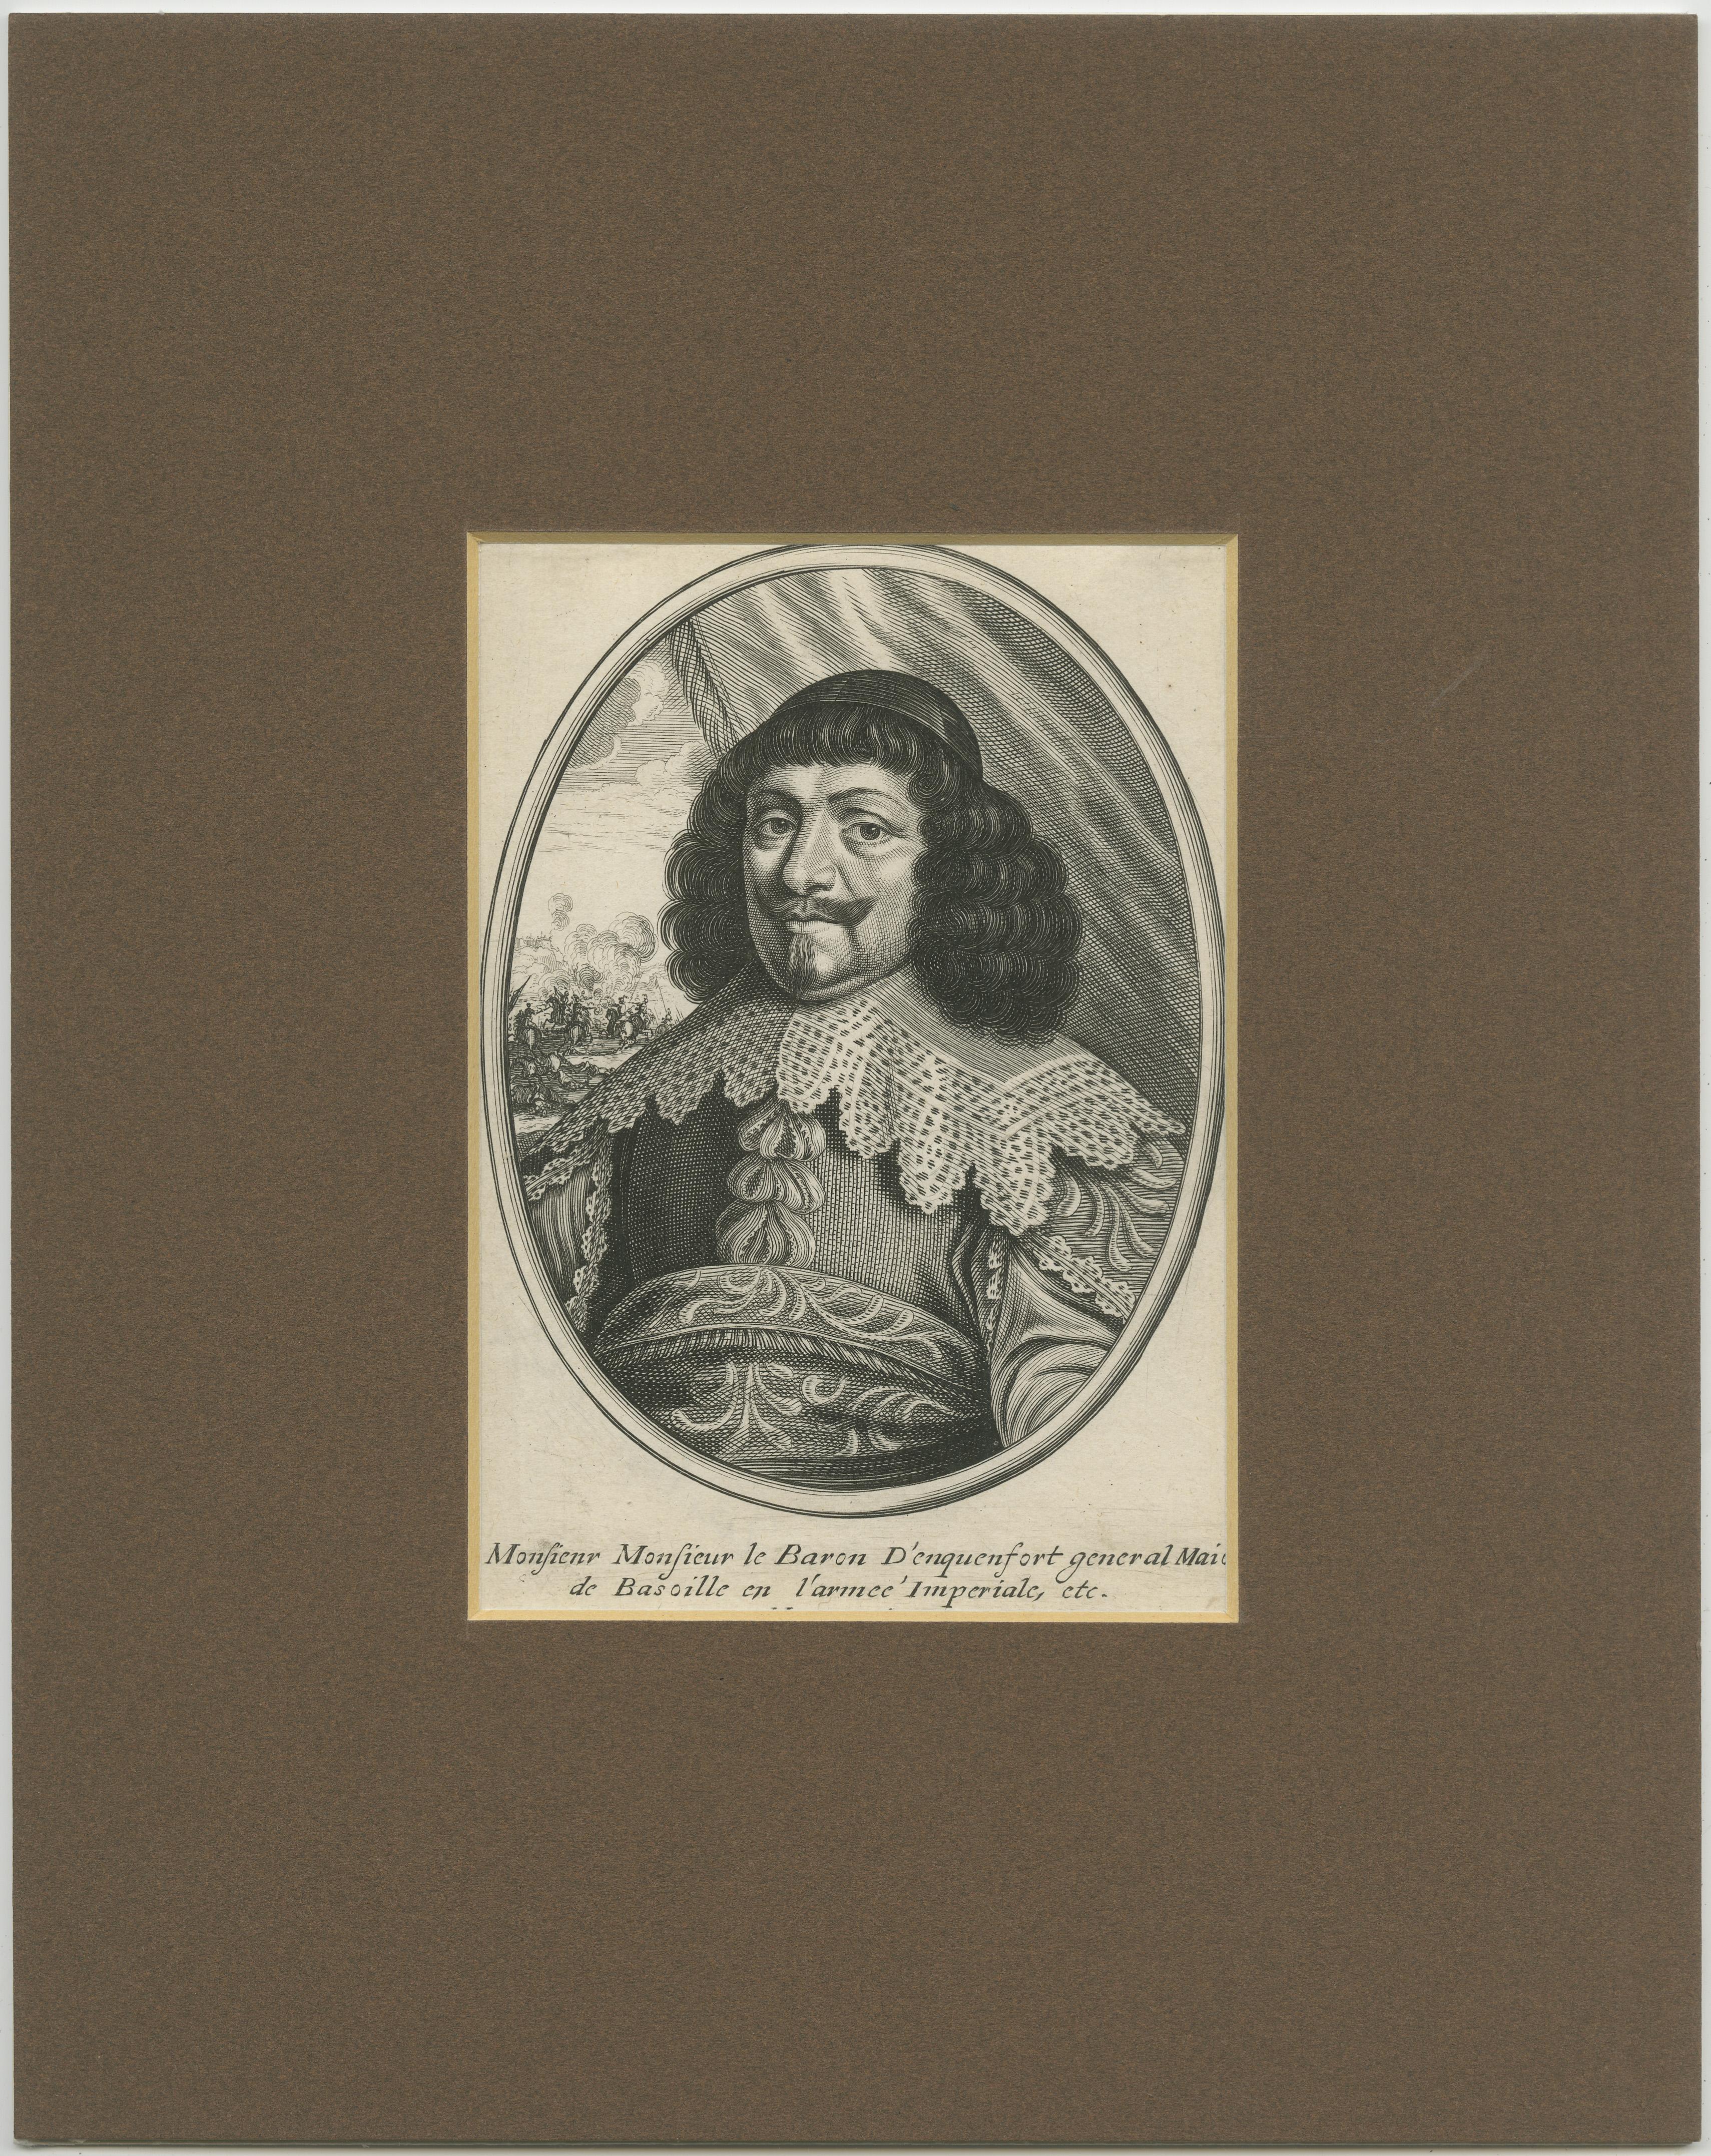 Antique print titled 'Monsieur Monsieur le Baron D'enquenfort (..)'. Portrait of General Adrian von Enckevort in middle age; half-length, standing to left, glancing towards the viewer; wearing skull cap, lace-trimmed collar, ornate fringed fabric